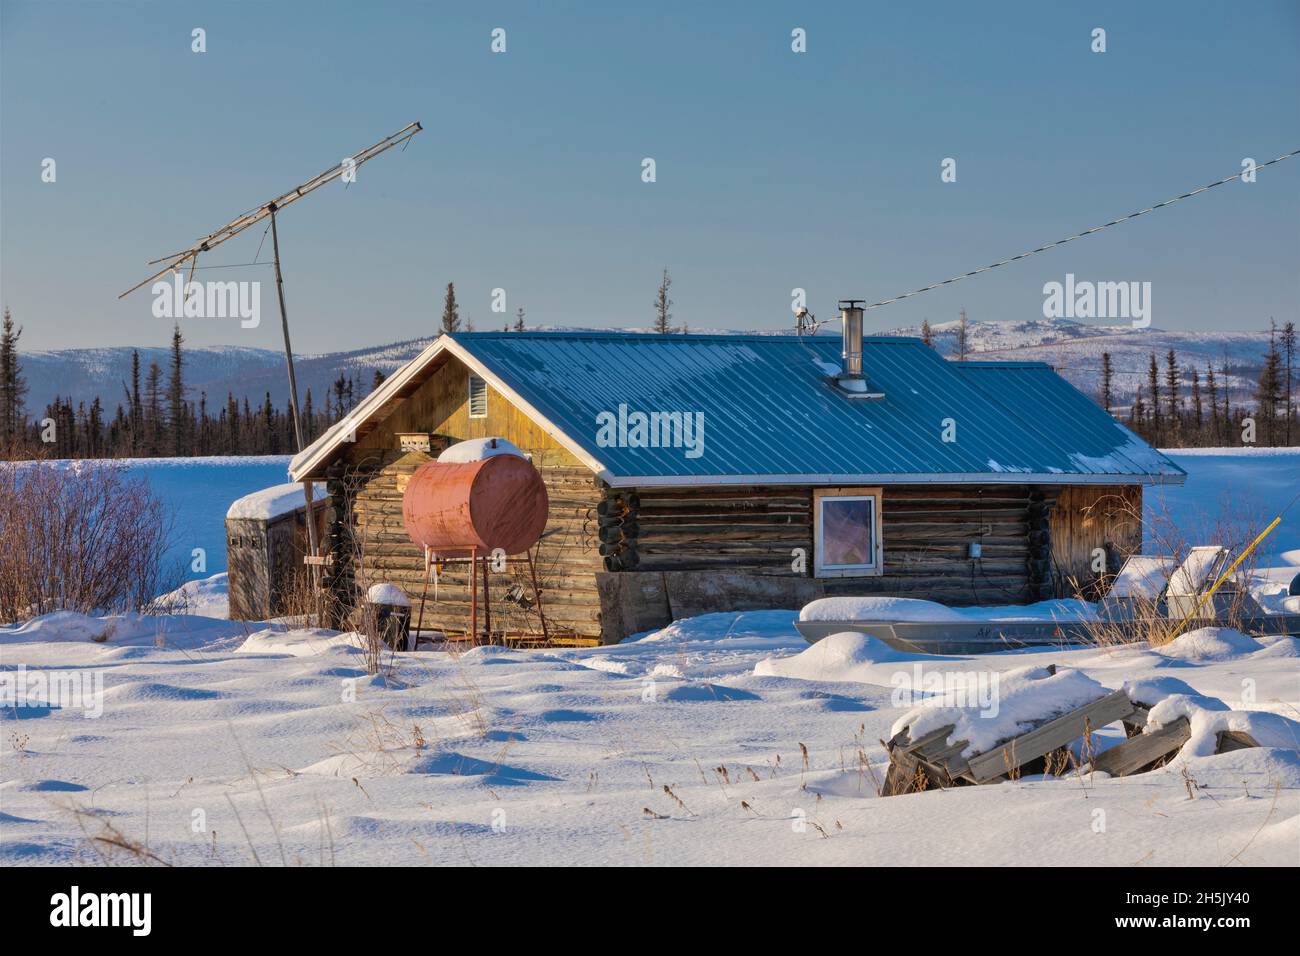 A log cabin is surrounded by snow, TV antenna and heating oil drum in winter, Nulato, Interior Alaska, USA; Nulato, Alaska, United States of America Stock Photo